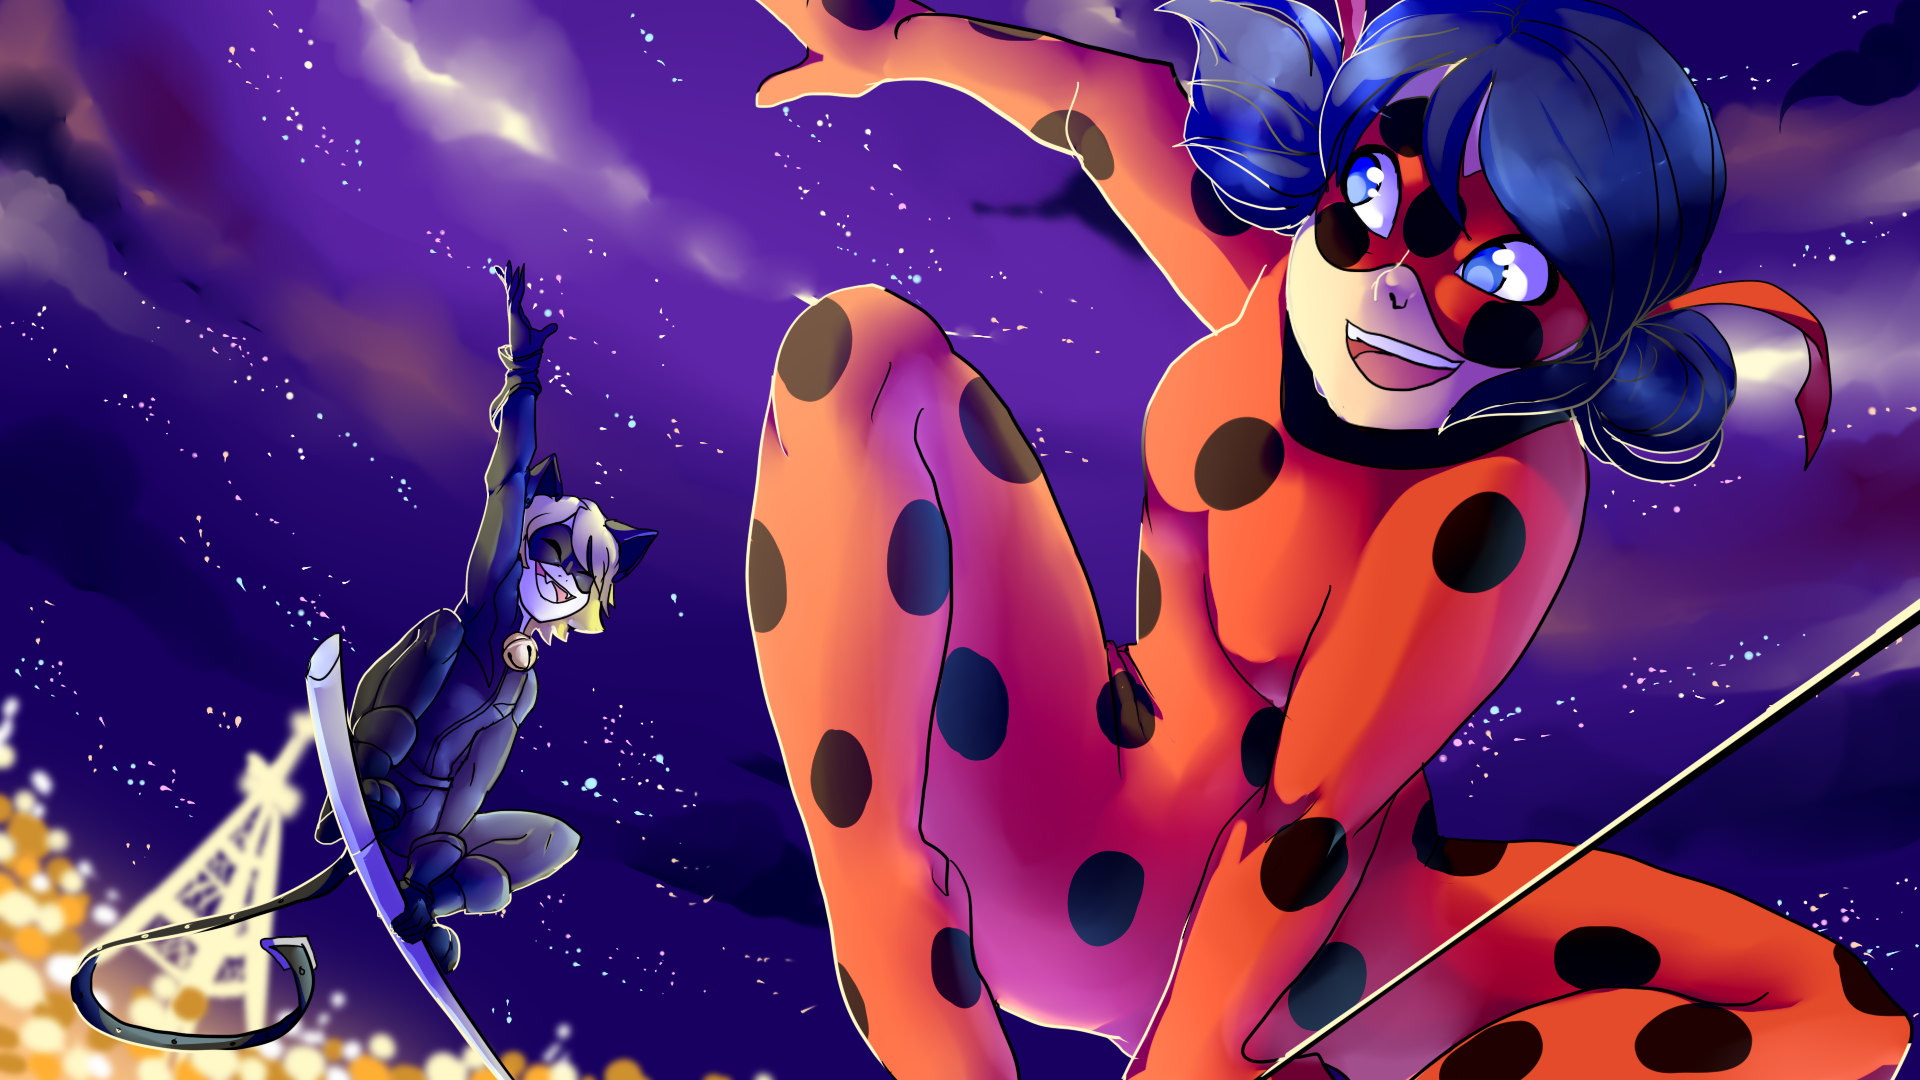 18 Miraculous Ladybug HD Wallpapers Background Images 1920x1080